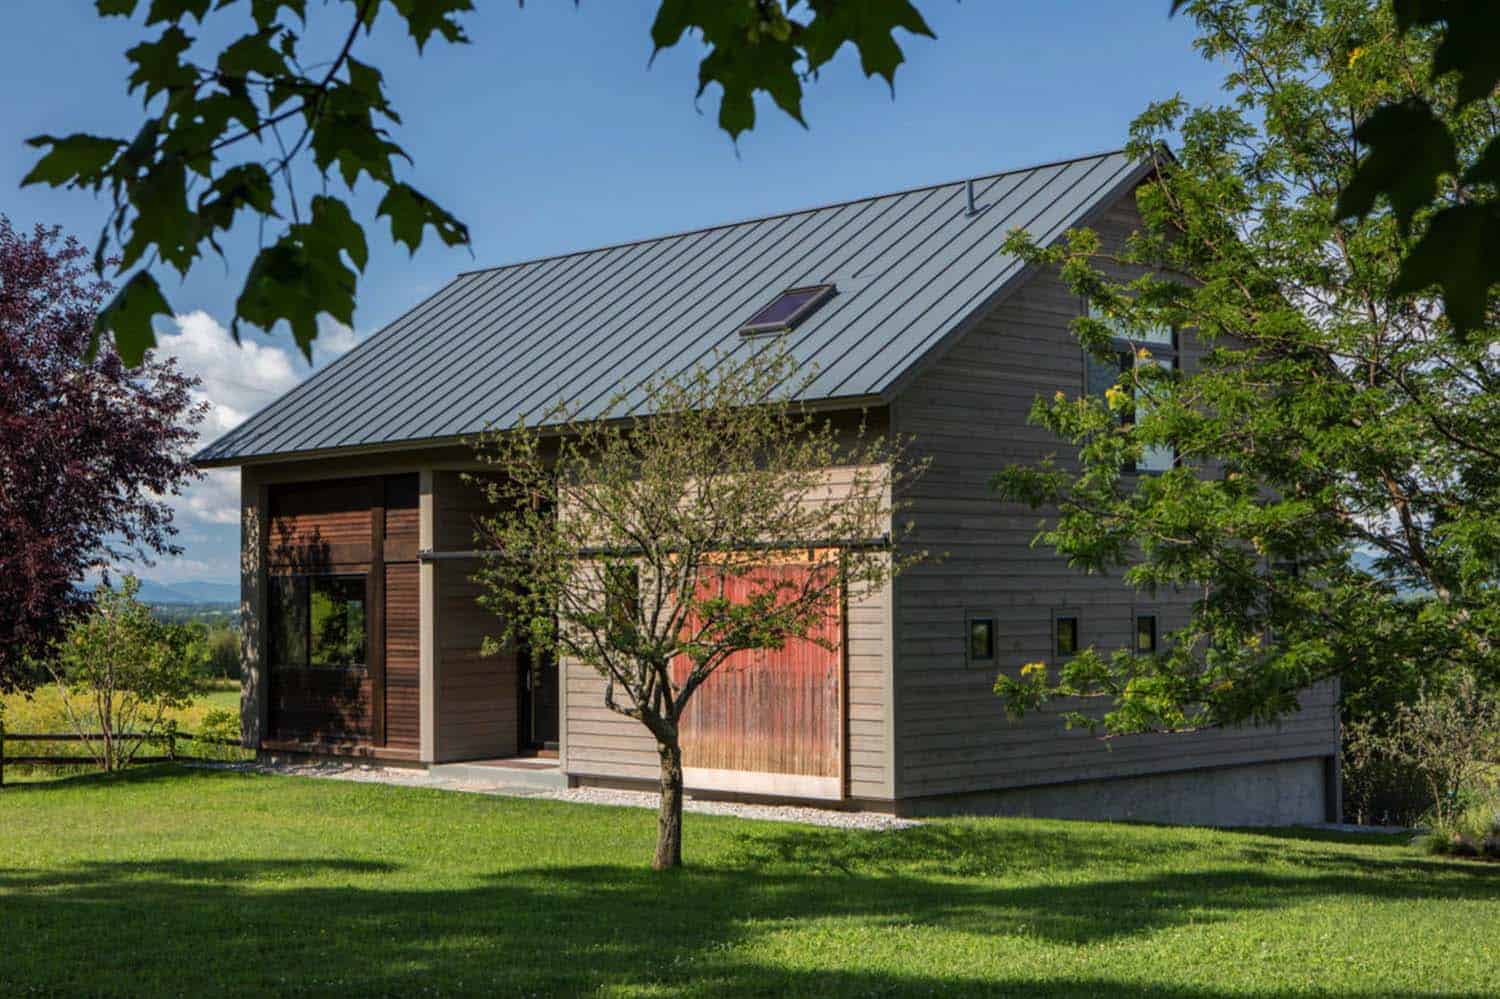 Carriage barn converted into breathtaking guesthouse in Vermont